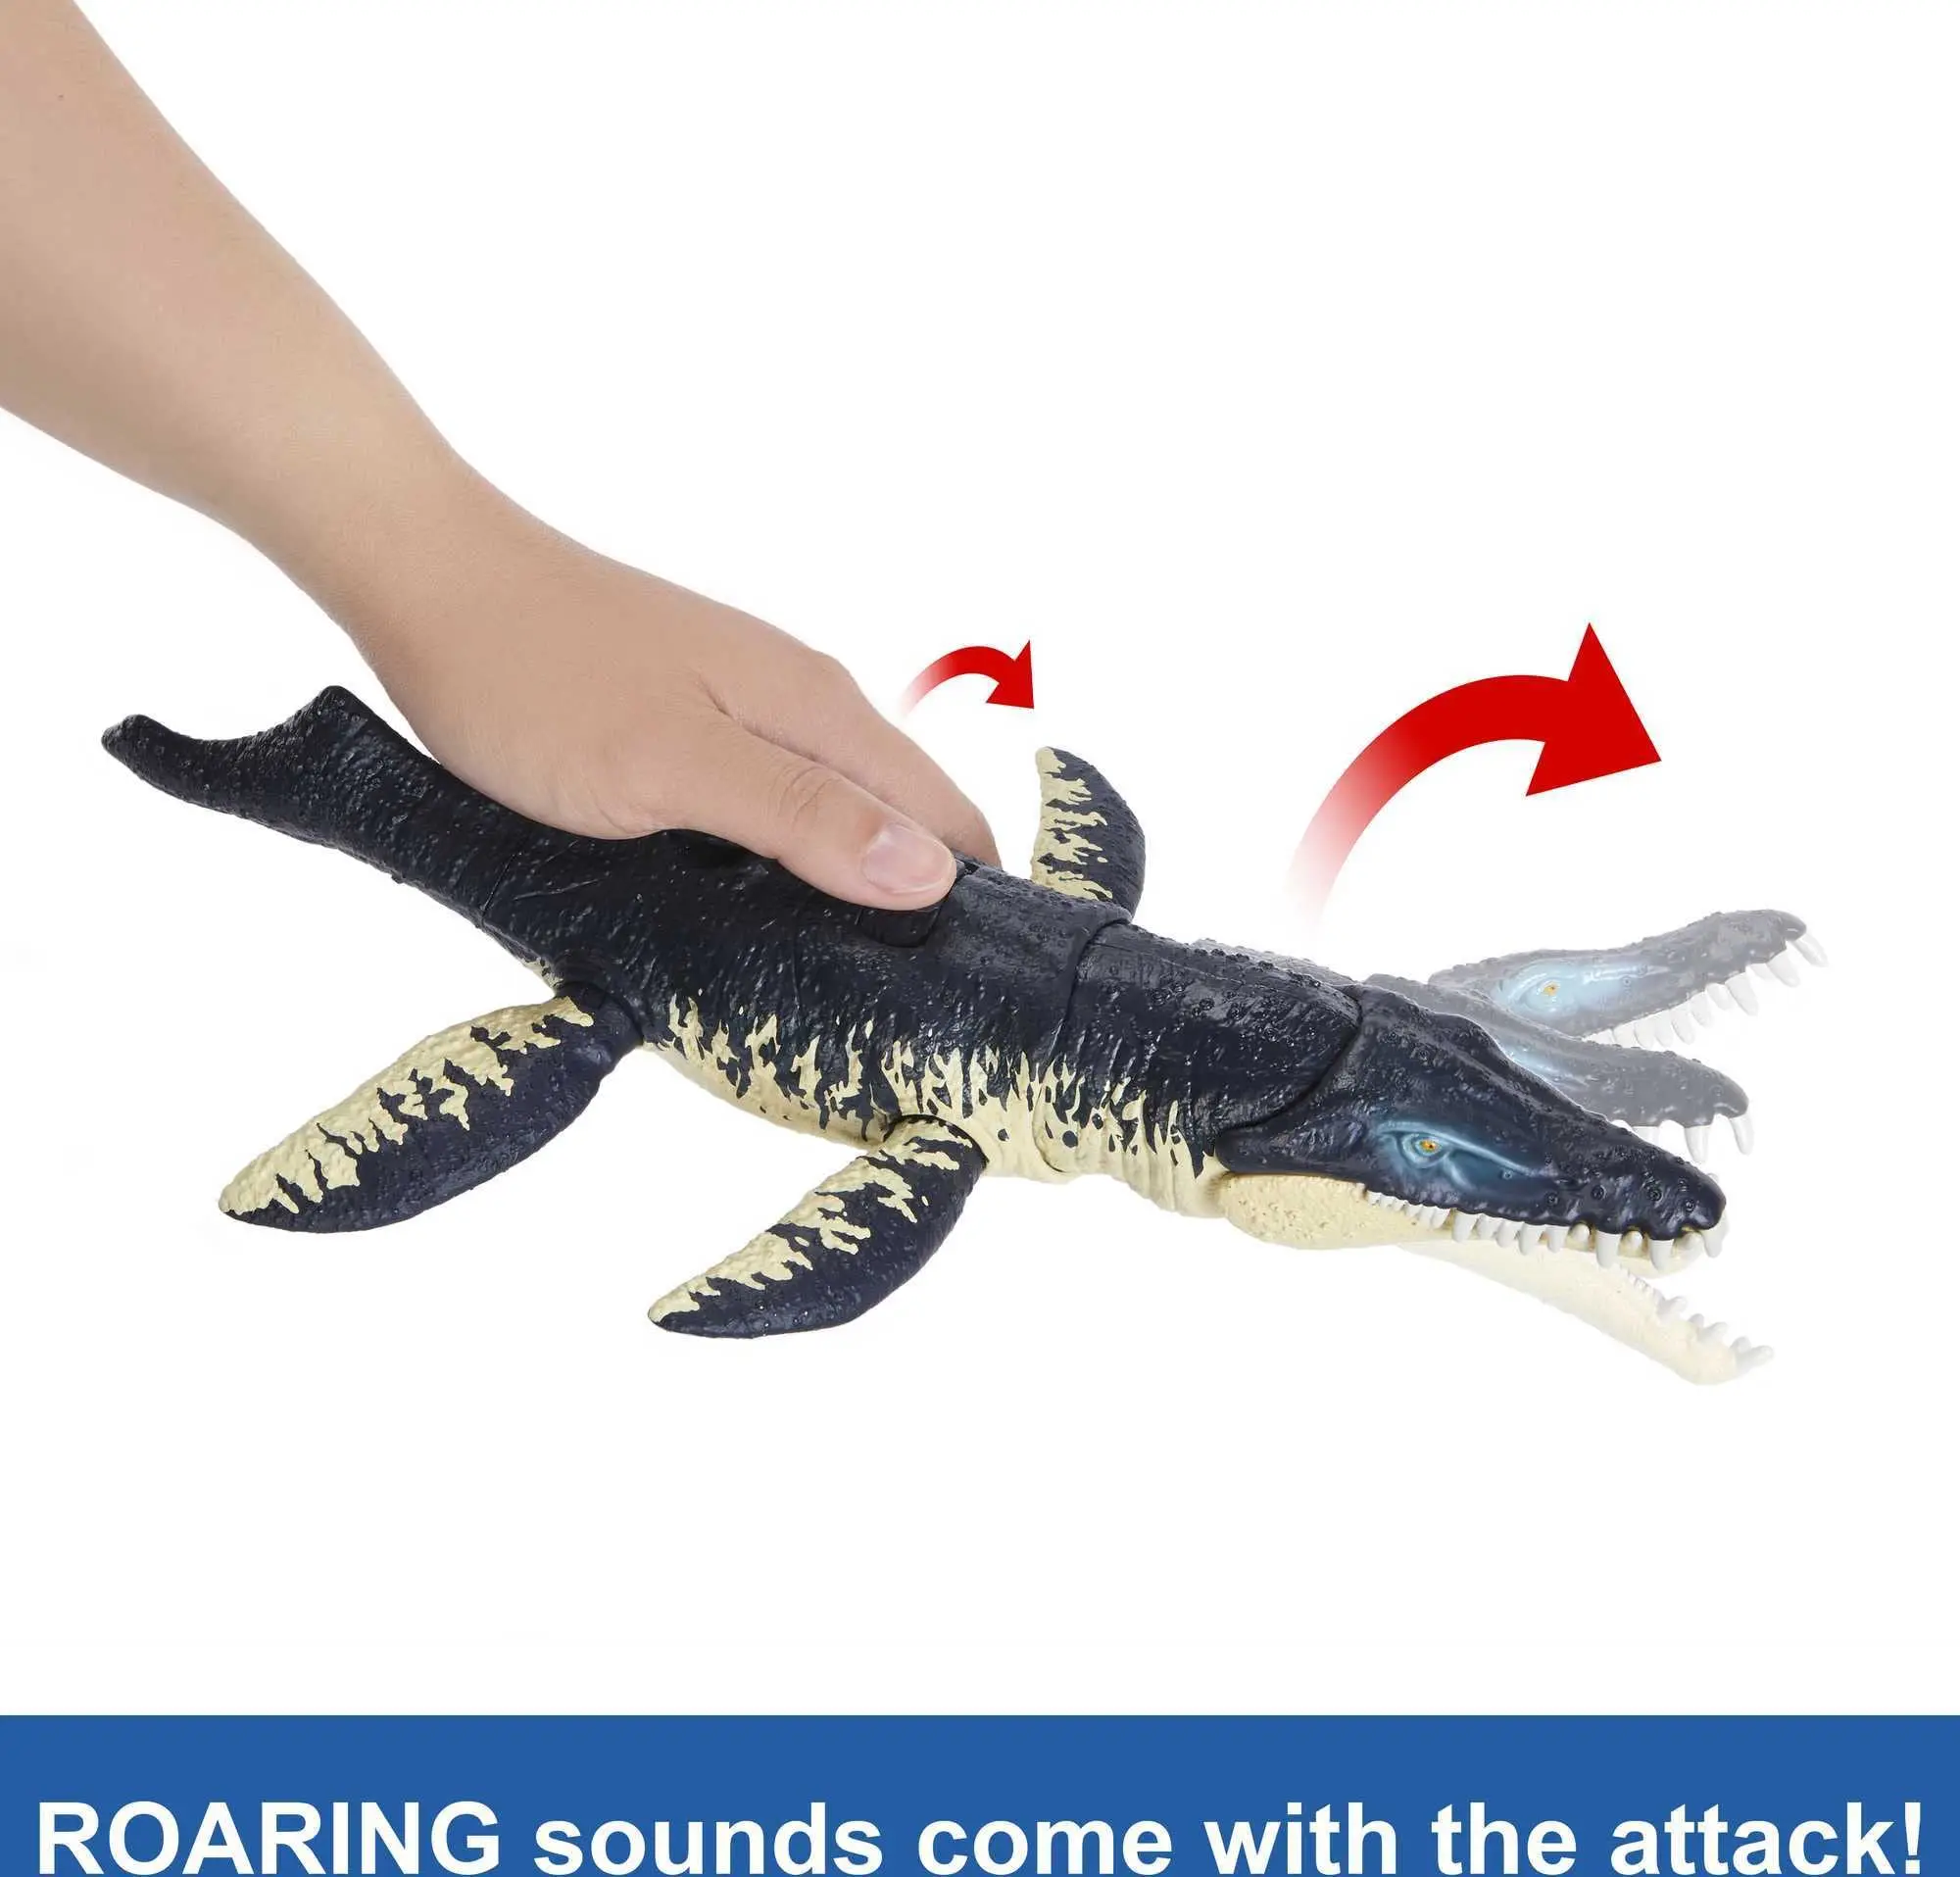 Jurassic World Dominion Dinosaur Figure Gigantic Trackers Kronosaurus with Attack Motion Gear Toy for Kids Birthday Gift HLP18 enlarge